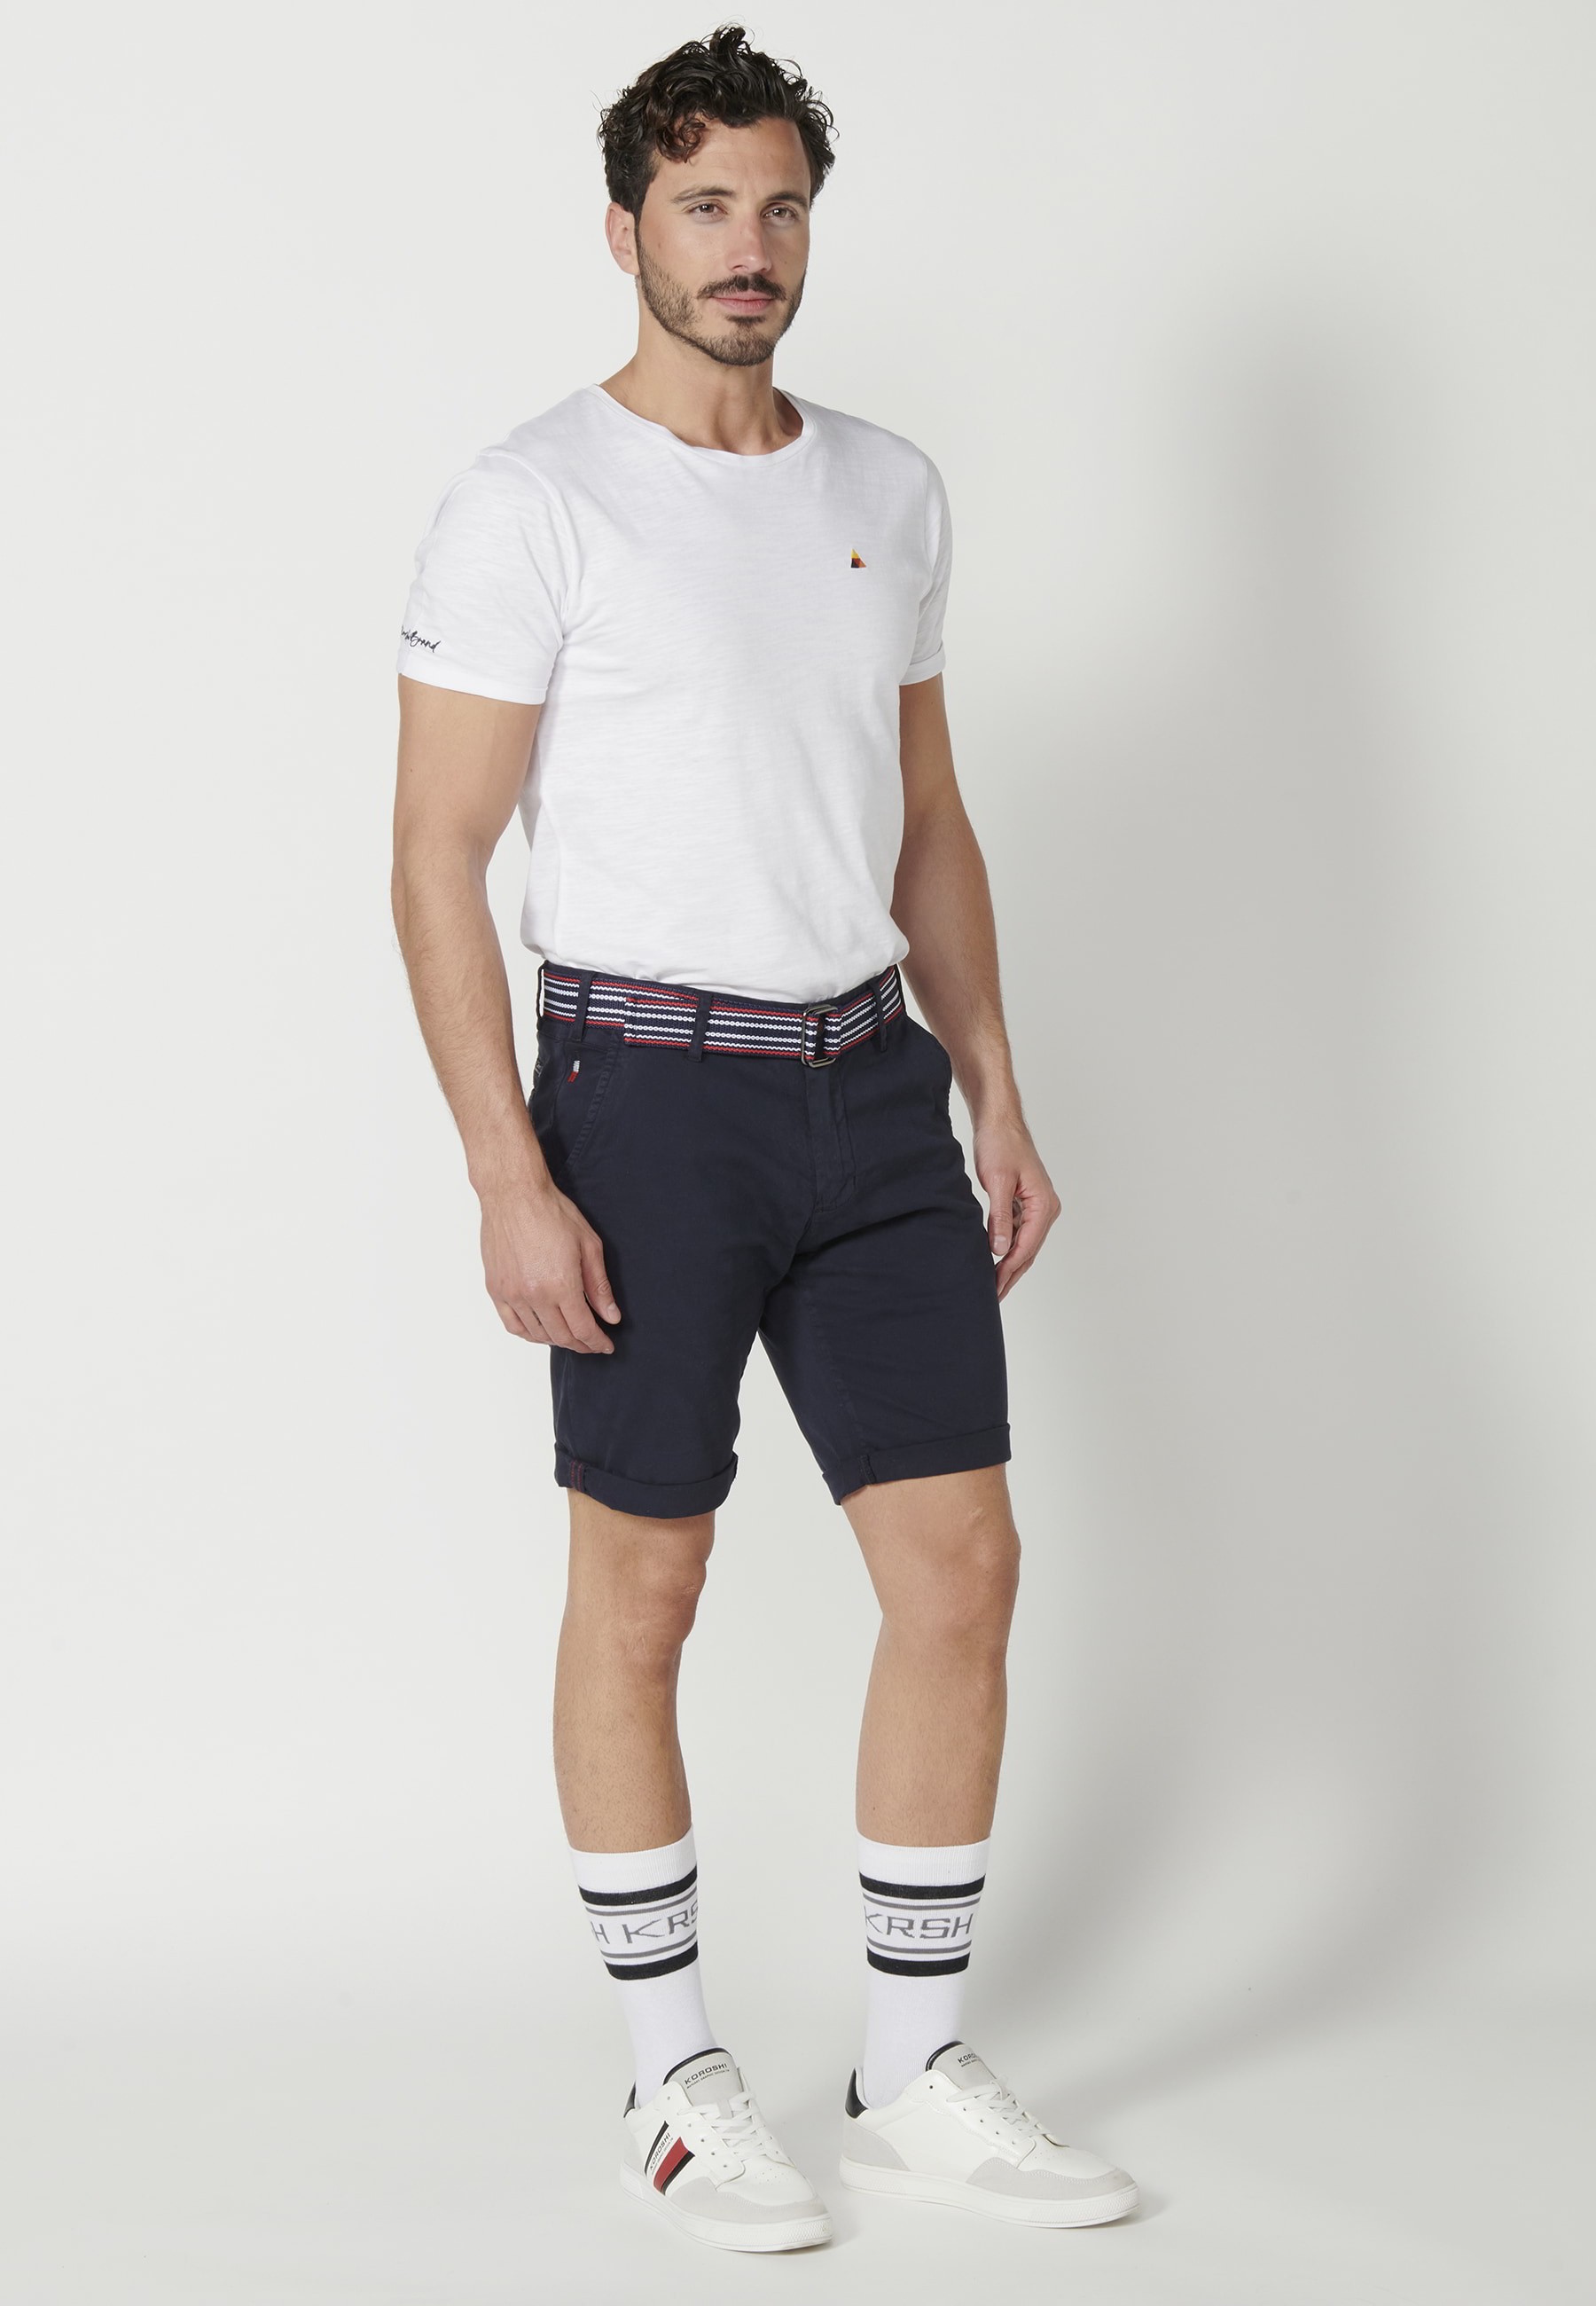 Navy Chinese style Bermuda shorts for Men